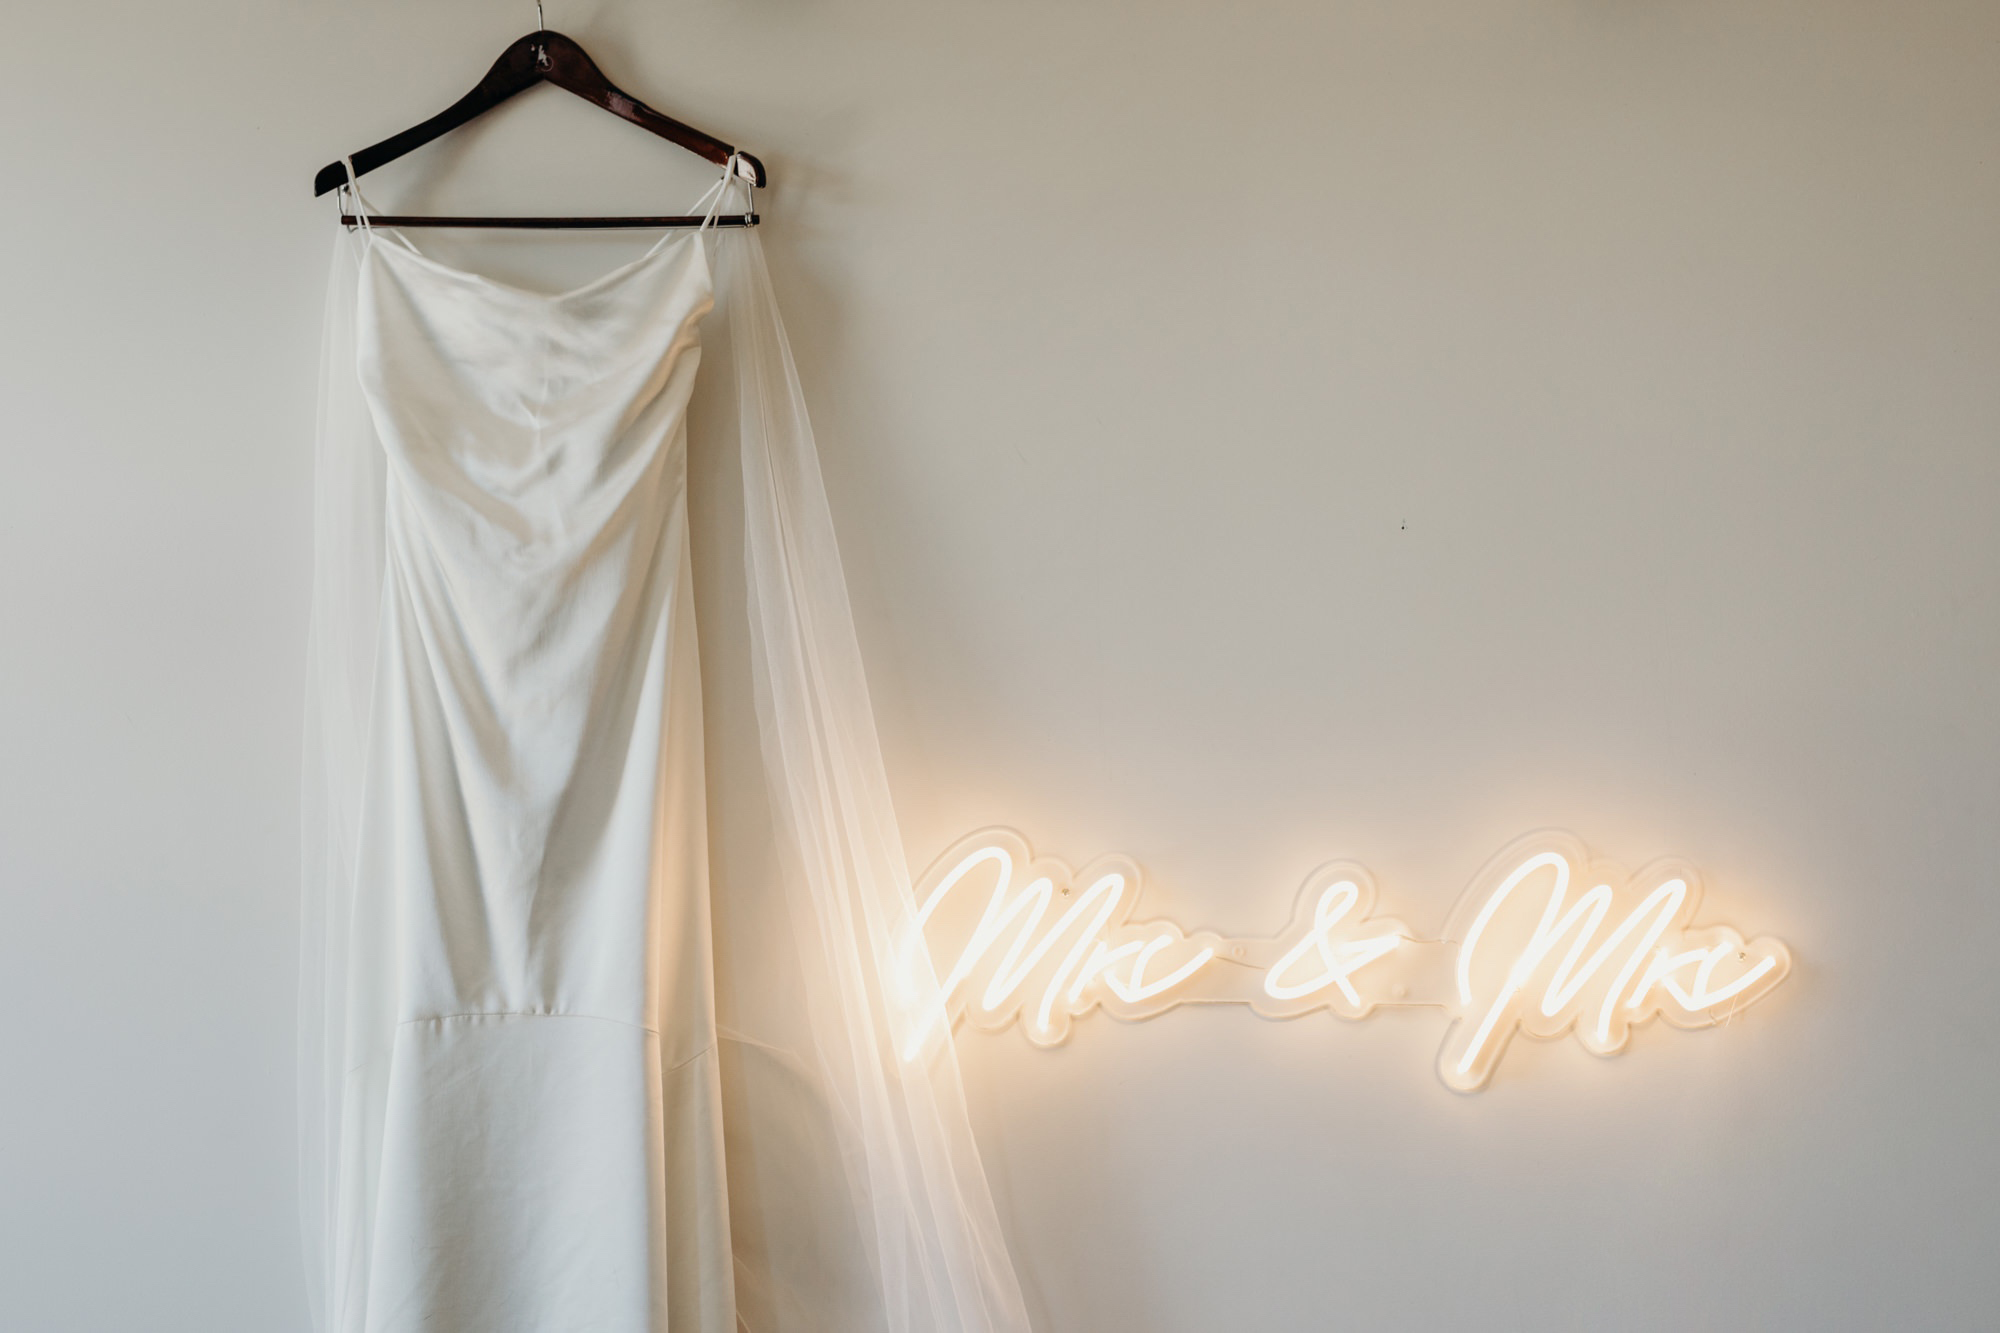 wedding dress hanging next to a neon sign that says mrs and mrs